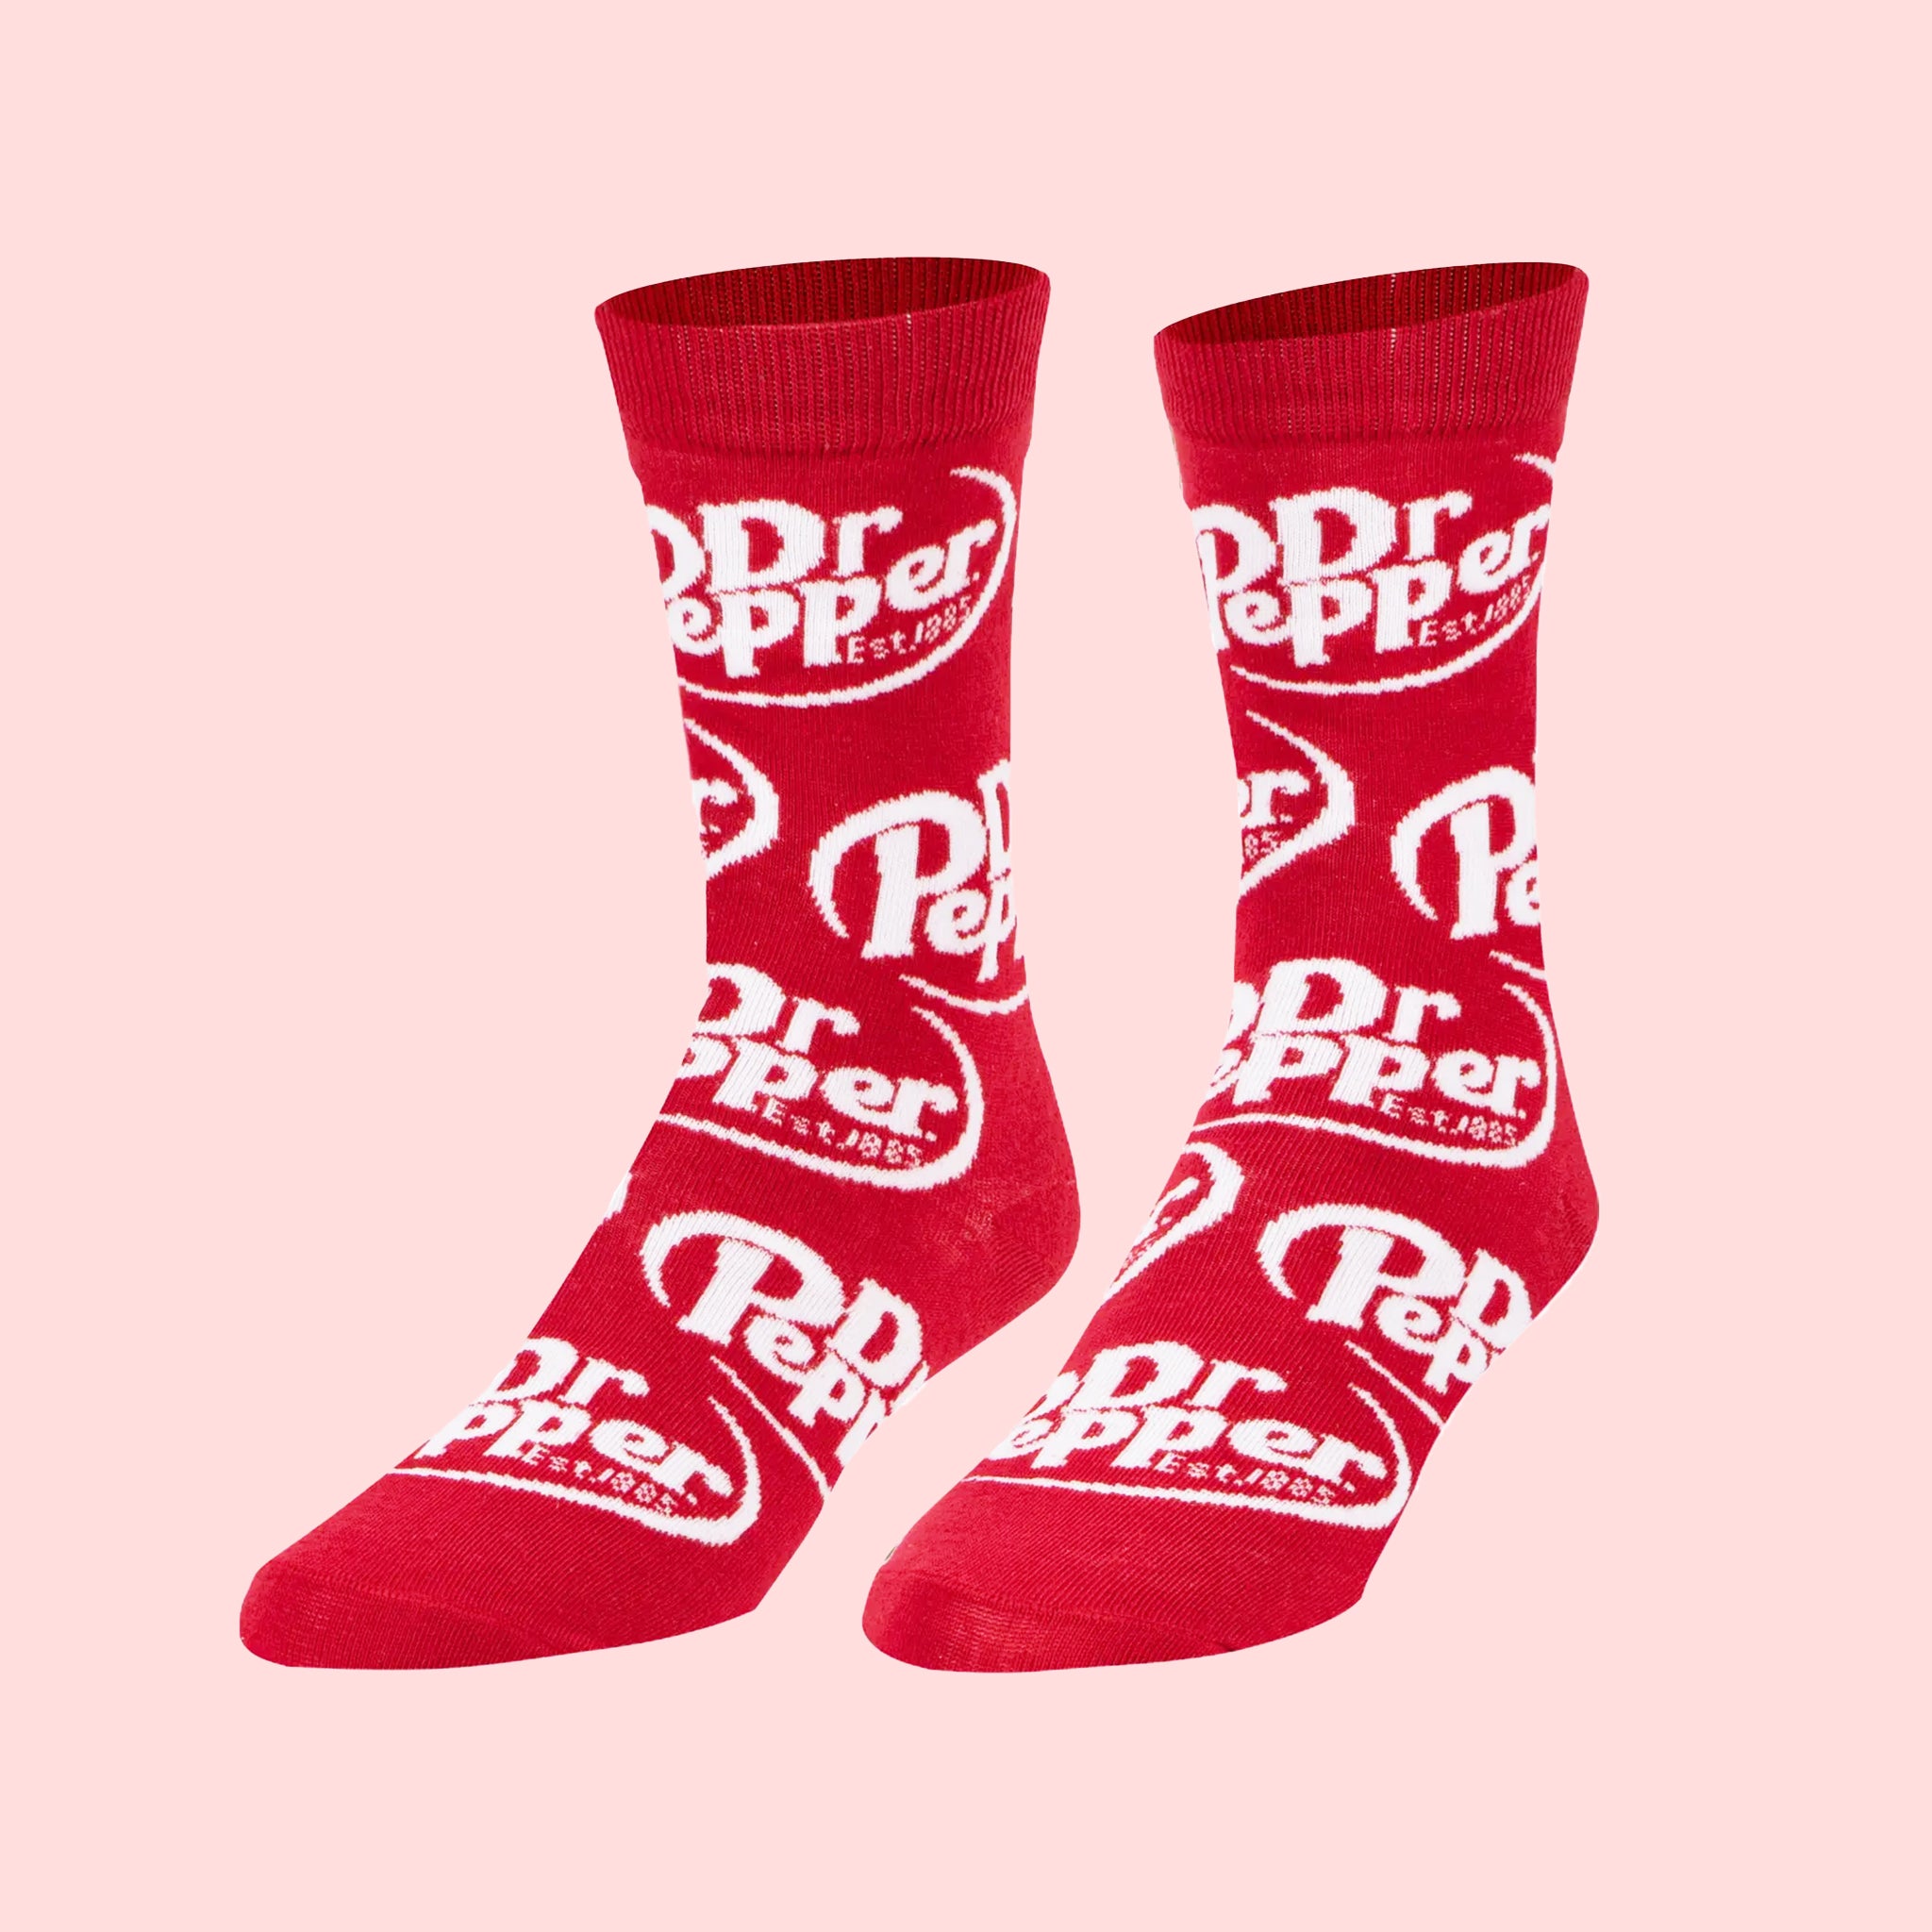 A pair of red socks with the Dr. Pepper logo on them. 